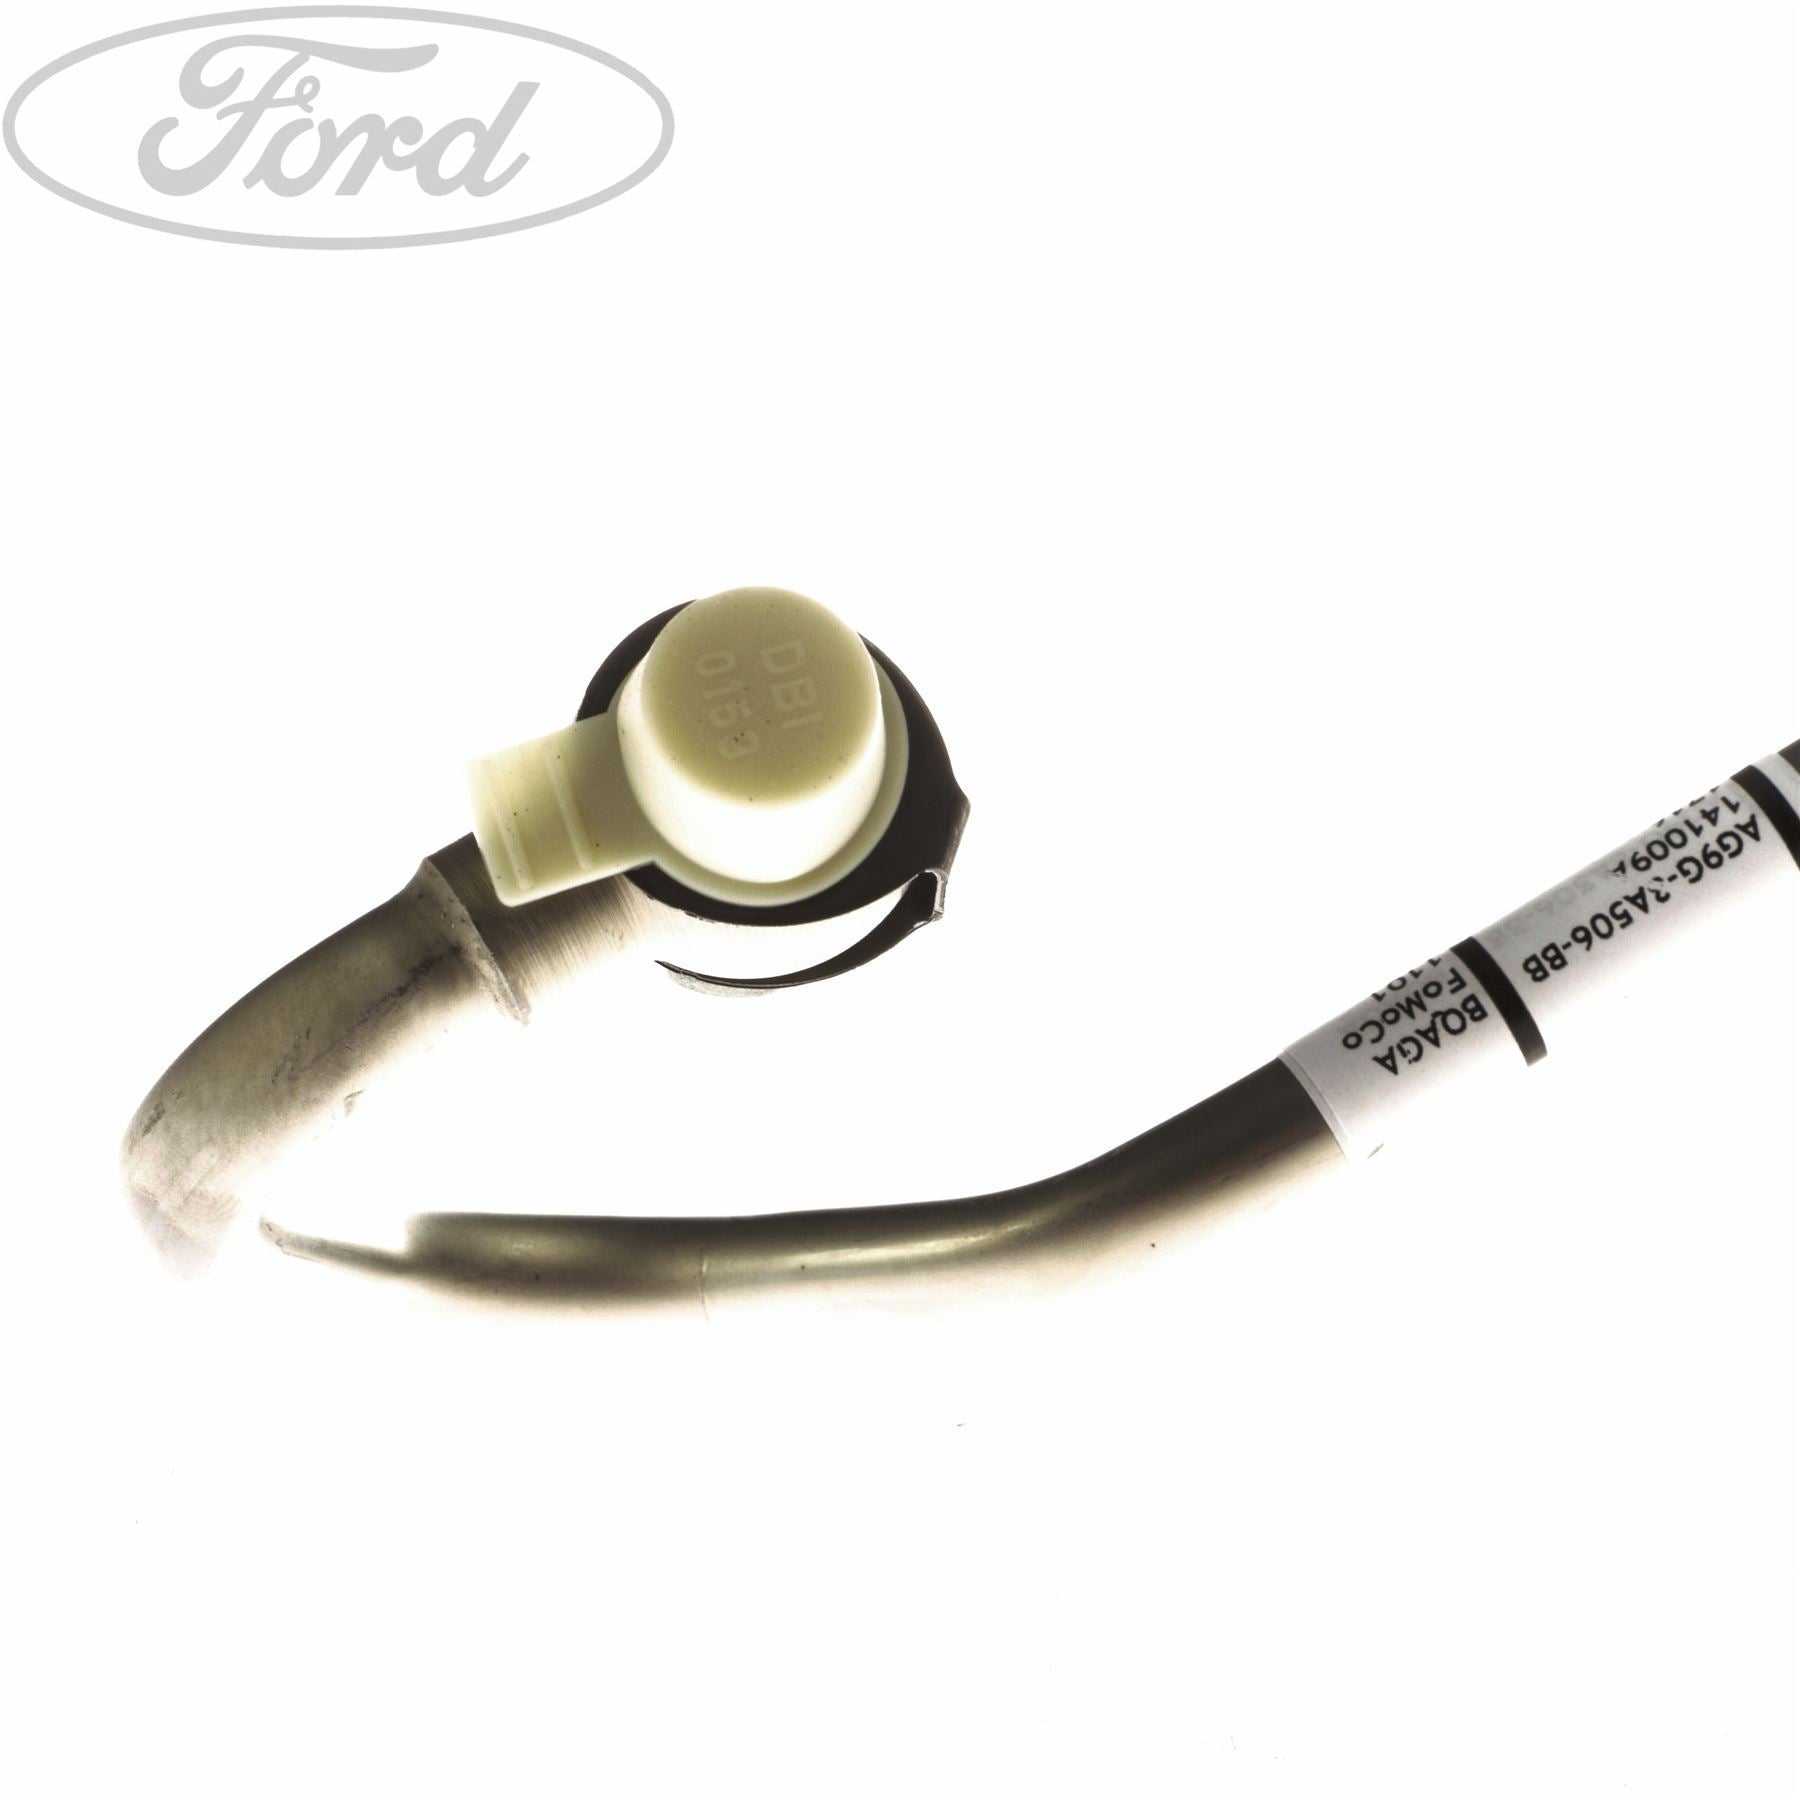 Ford, TURBO WATER INLET HOSE